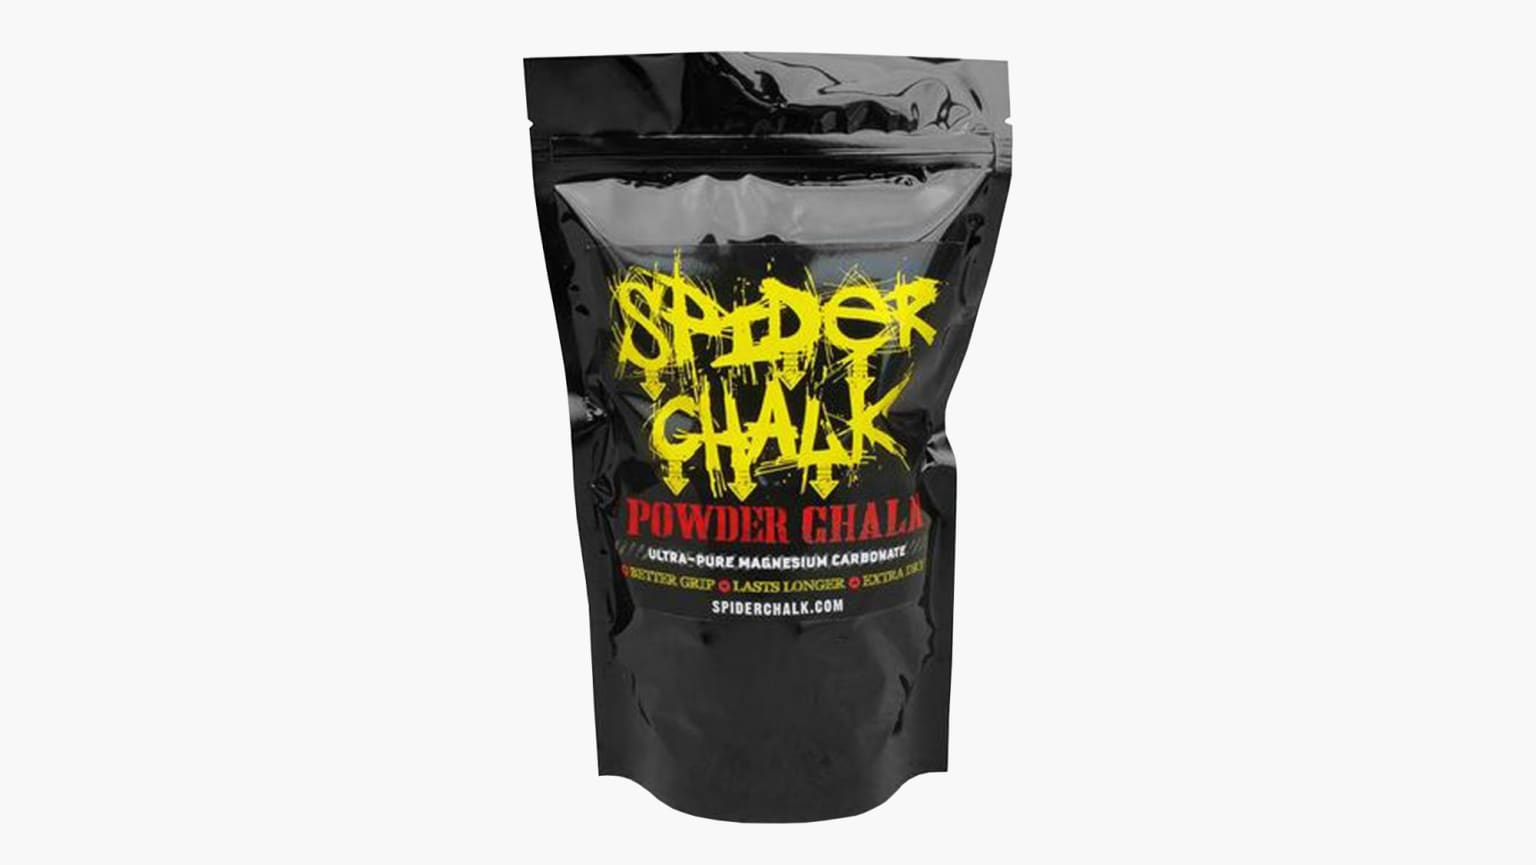 Spider Chalk Chunky Chalk - A Mix of Powder and Blocks, 8 oz Bag - Extra Dry, Long-Lasting Grip - for Rock Climbing (Indoor & ou